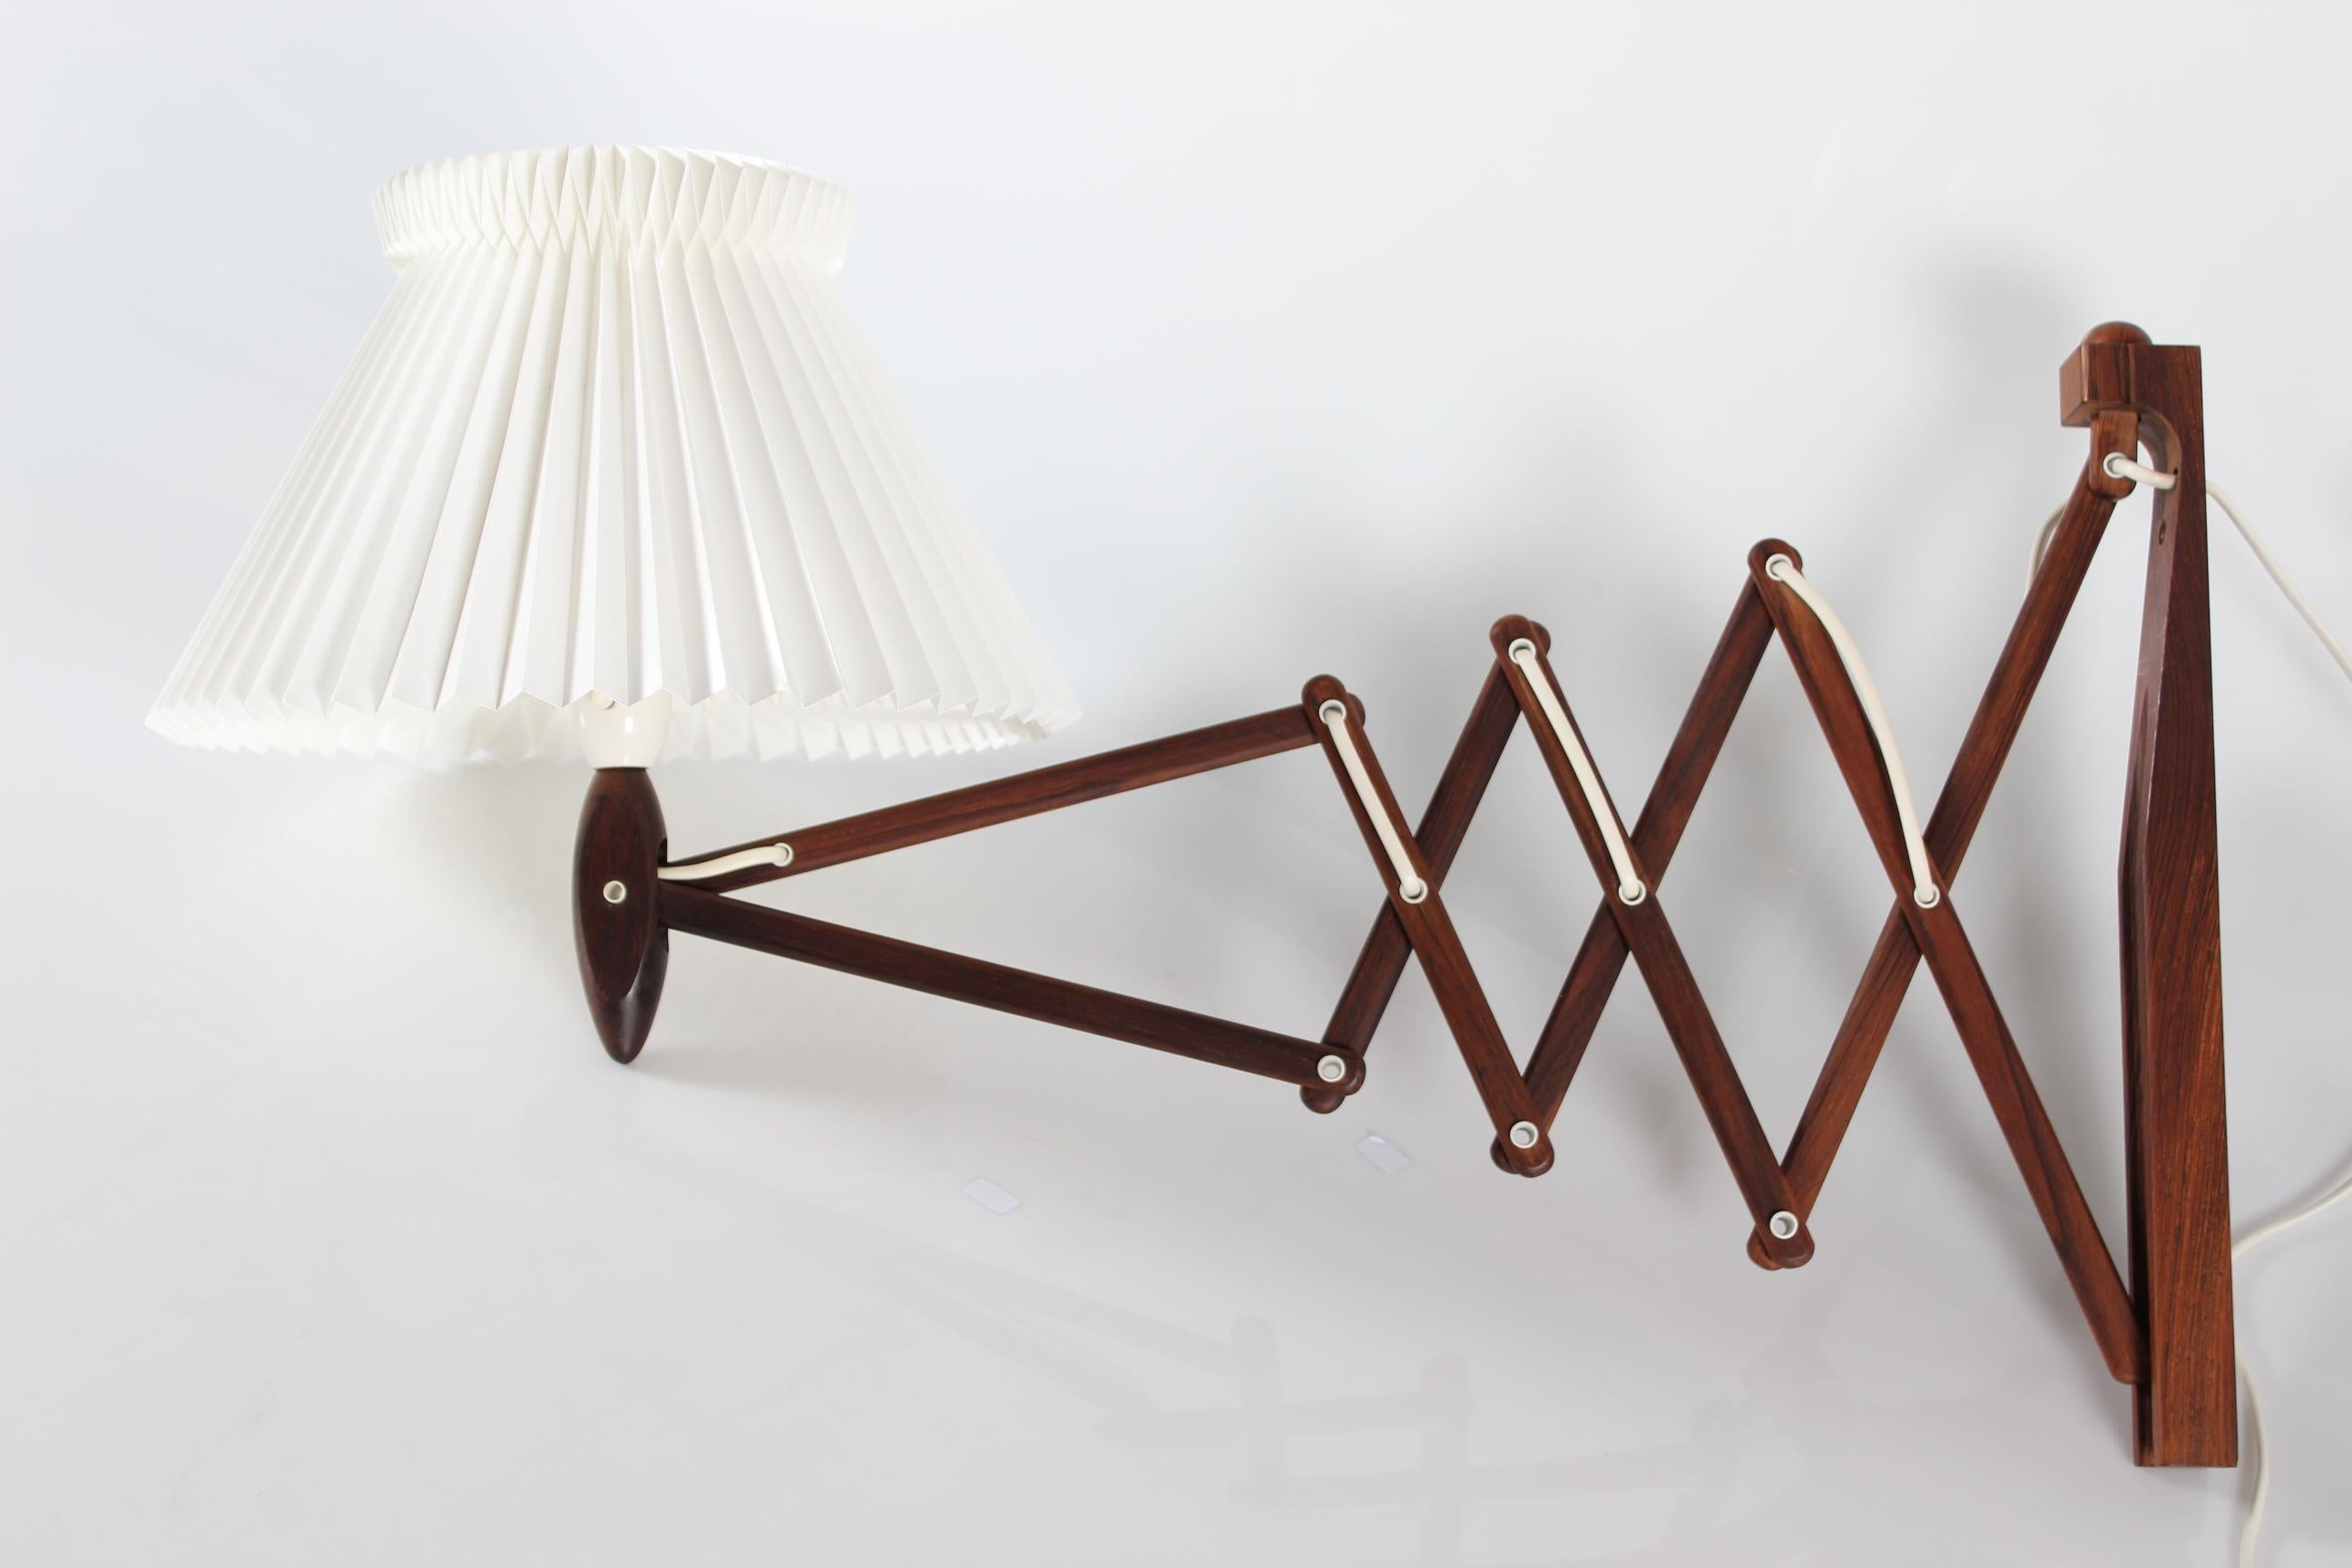 Vintage Le Klint wall lamp model 234 by Erik Hansen.
It's made of solid rosewood with a factory new original Le Klint lamp shade of white plastic designed by Tage Klint.
It is possible to adjust the length of the lamp

Measures: 
Length or depth